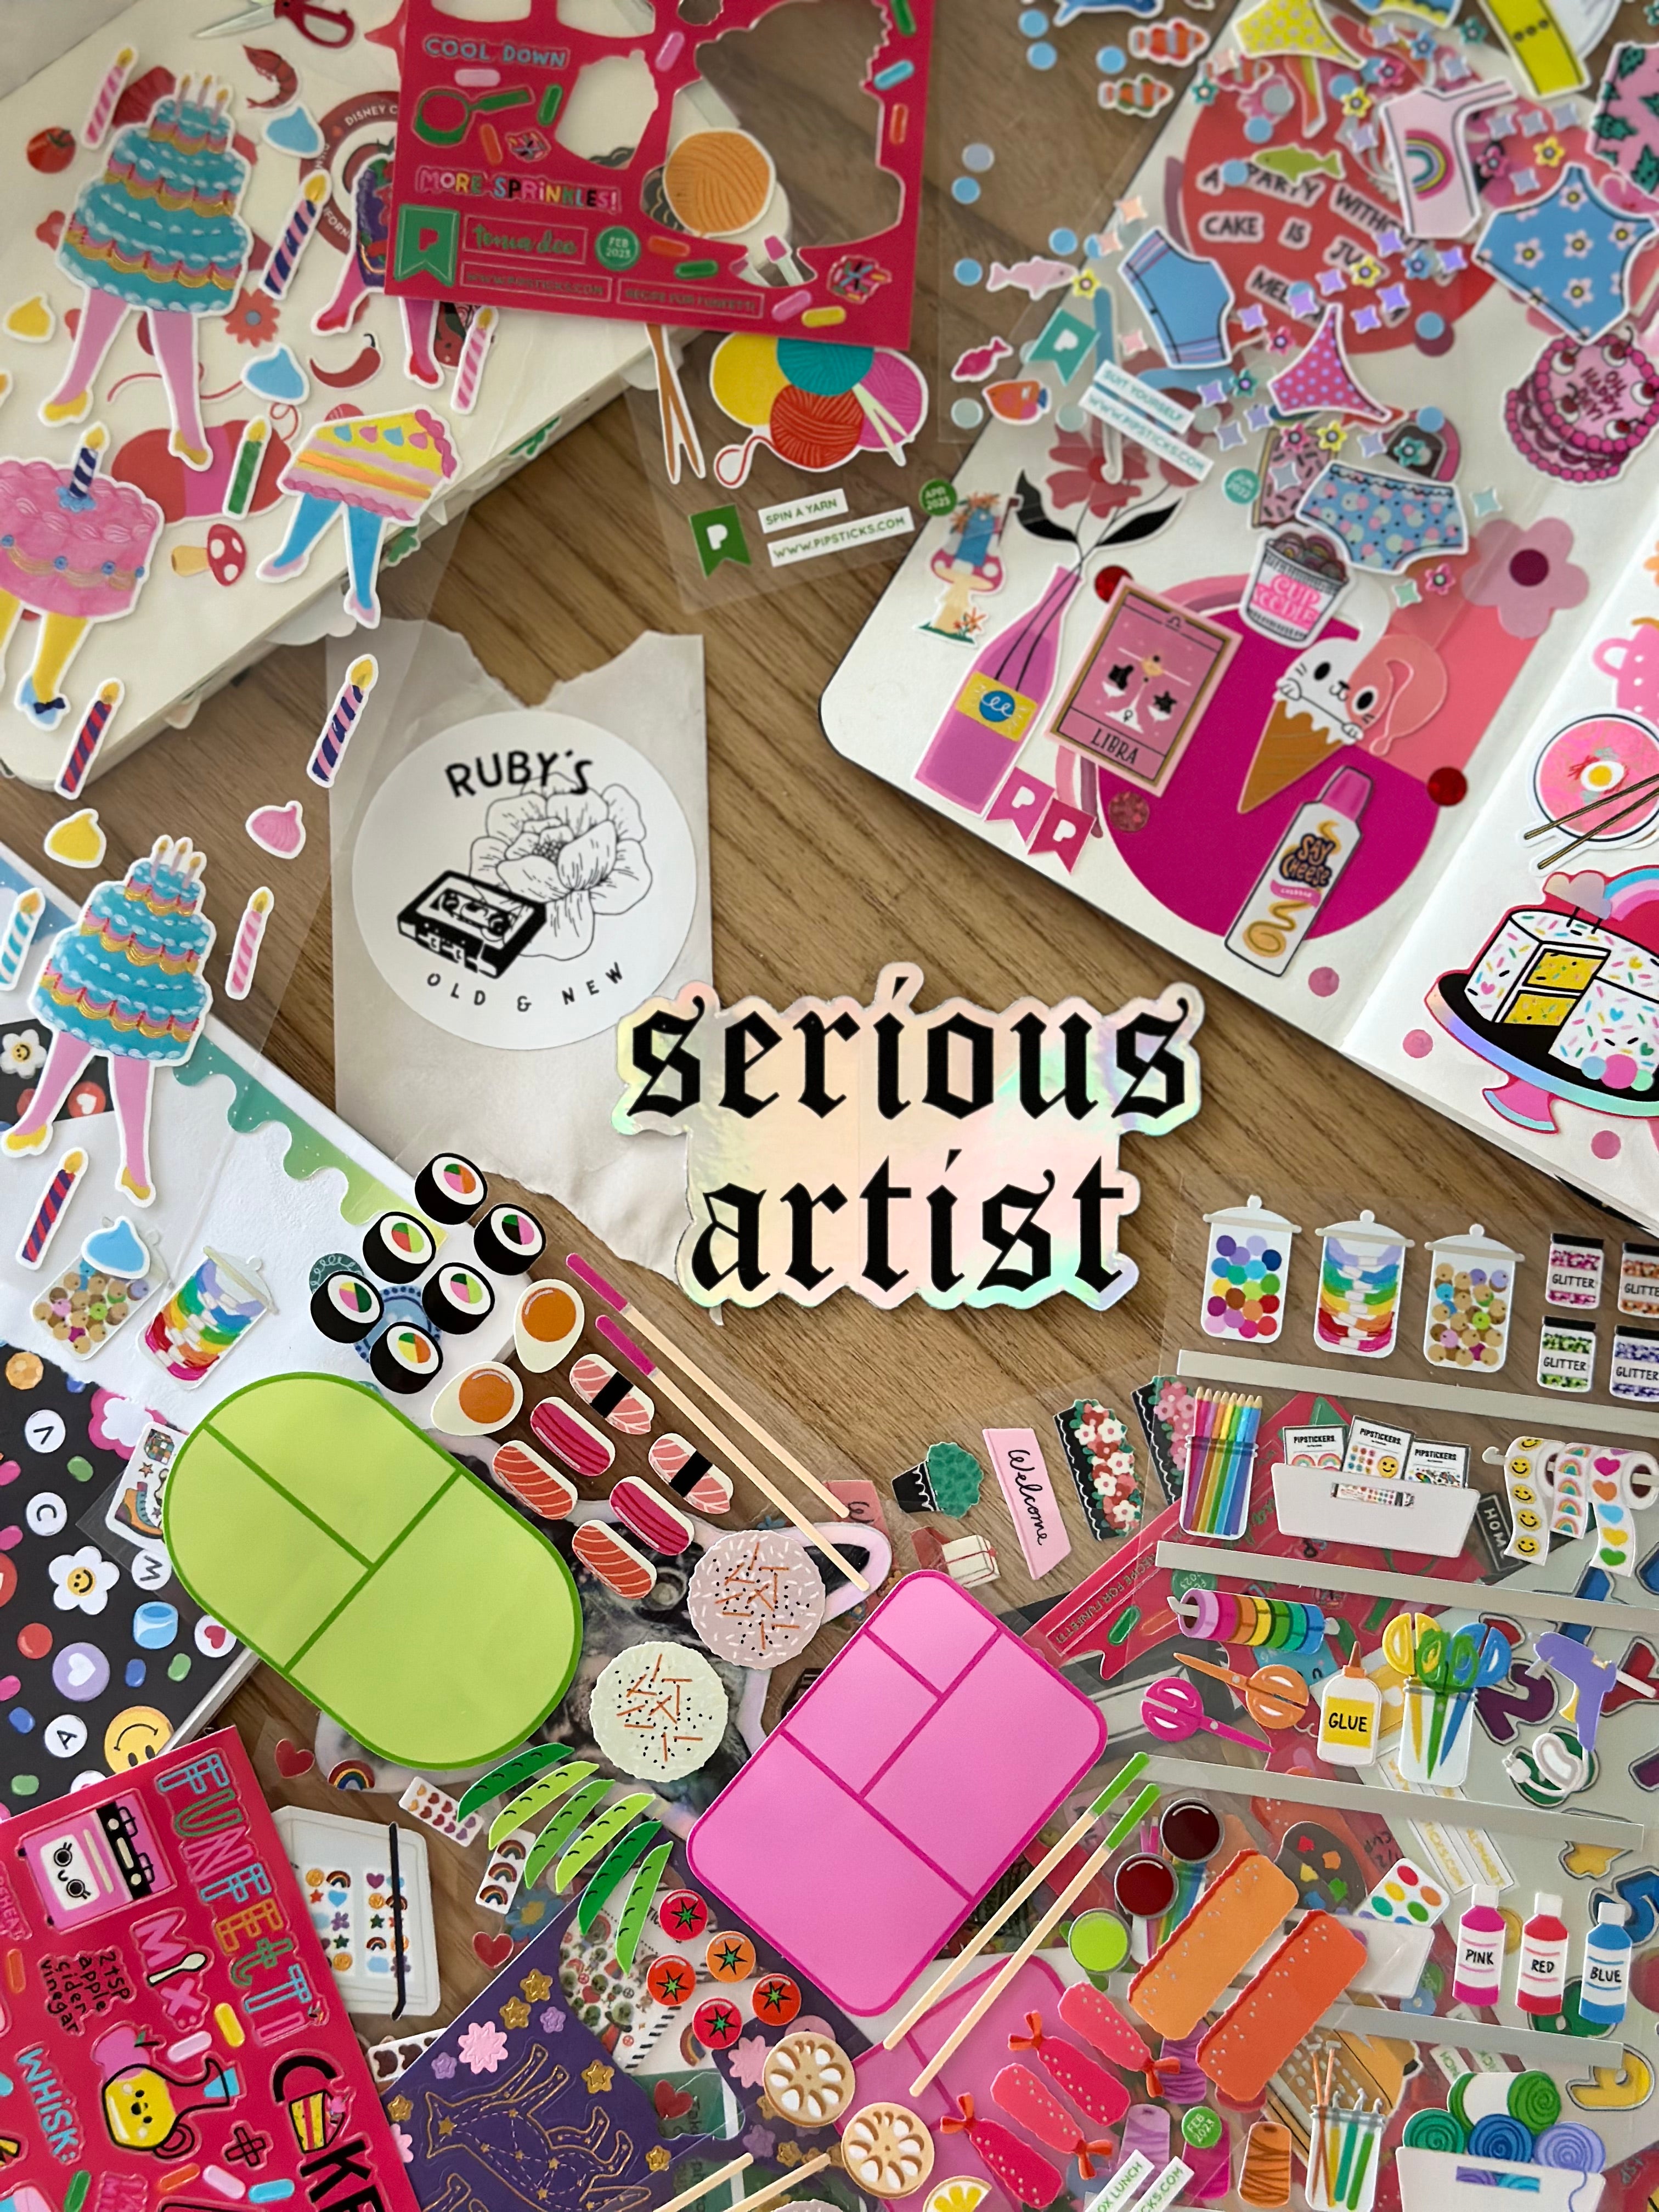 a flatlay of stickers with a holographic sticker in the middle that says "serious artist"